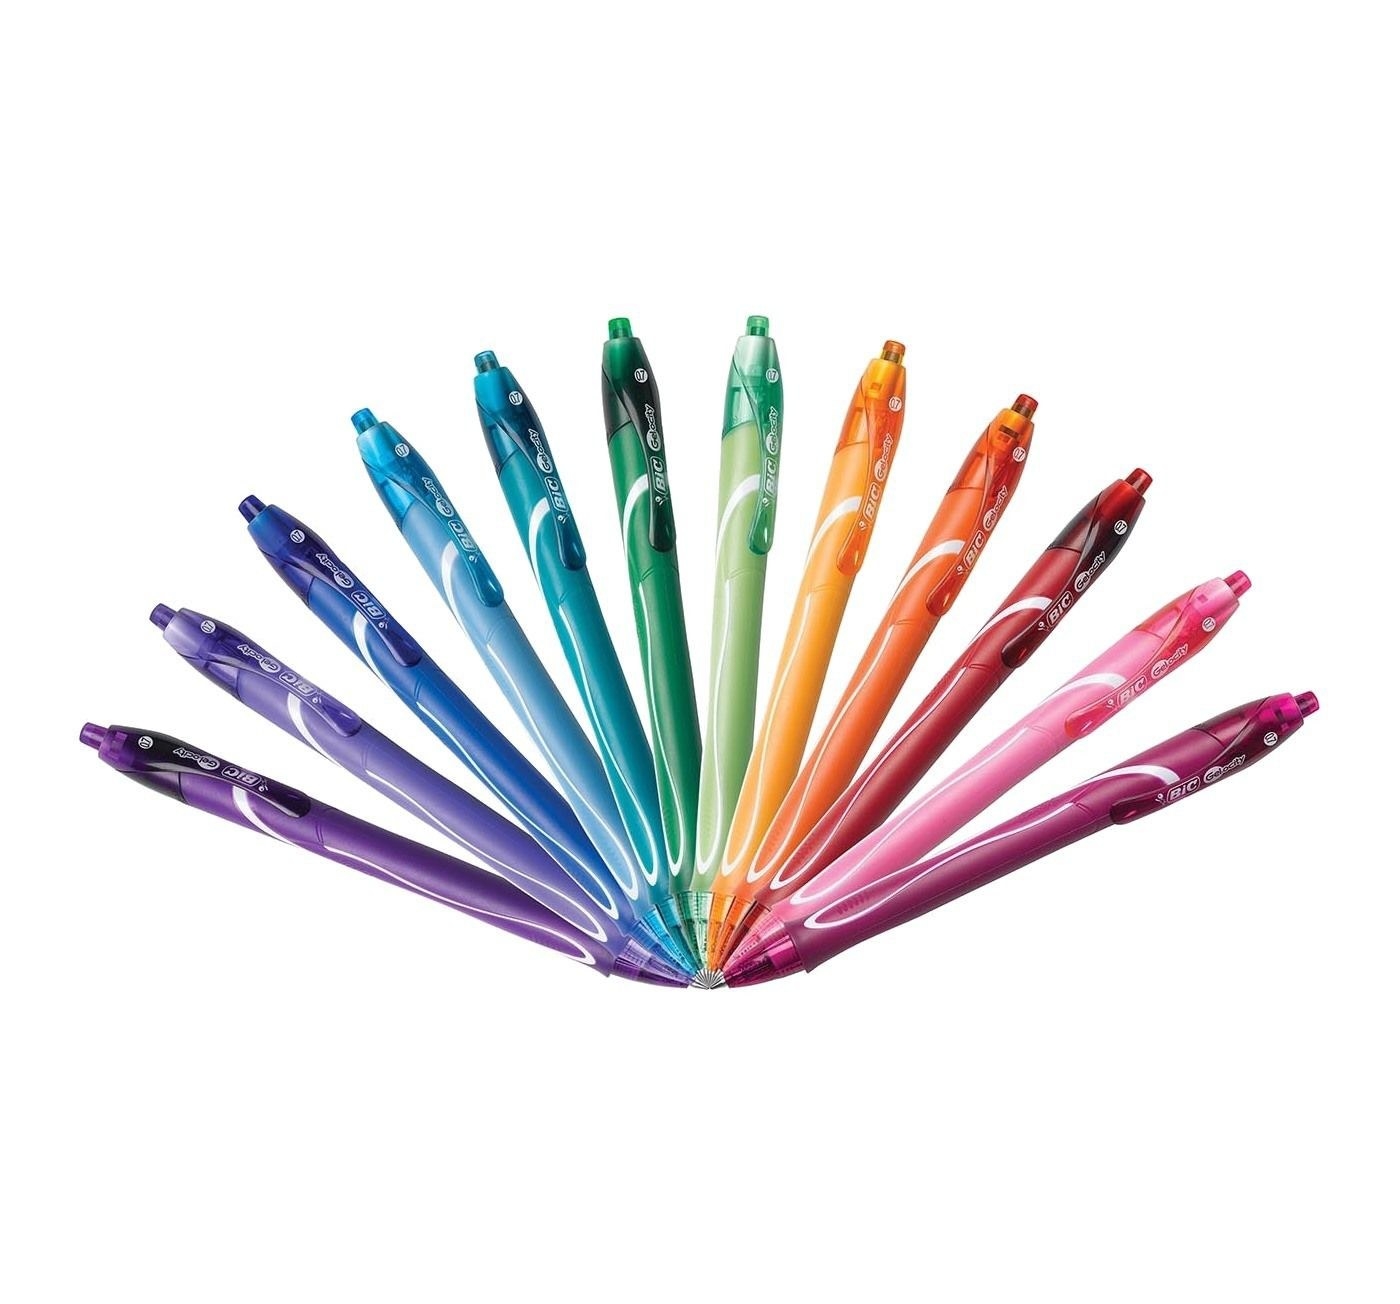 12 bic pens in an array of rainbow colors